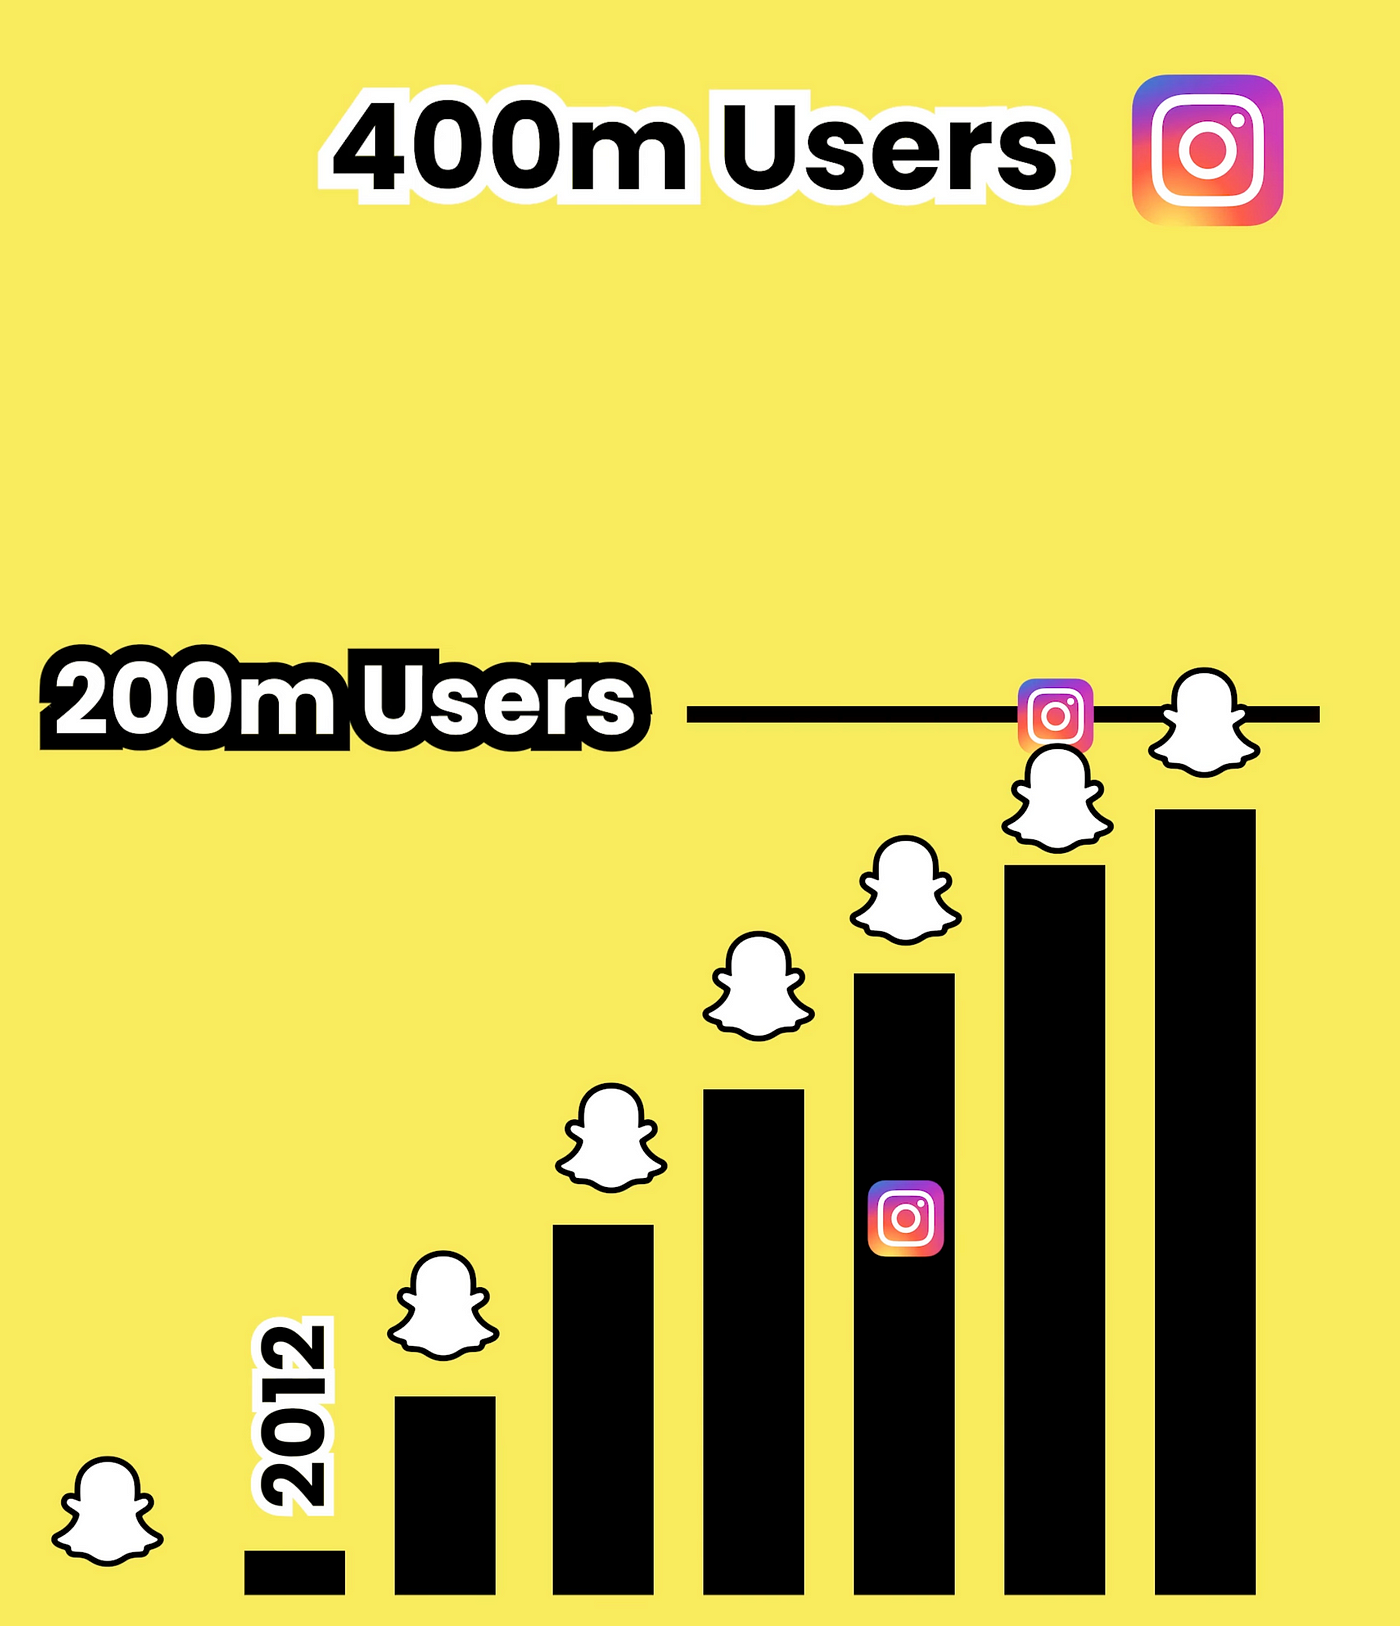 TikTok Earned $205 Million More Than Facebook, Twitter, Snap And Instagram  Combined On In-App Purchases In 2023